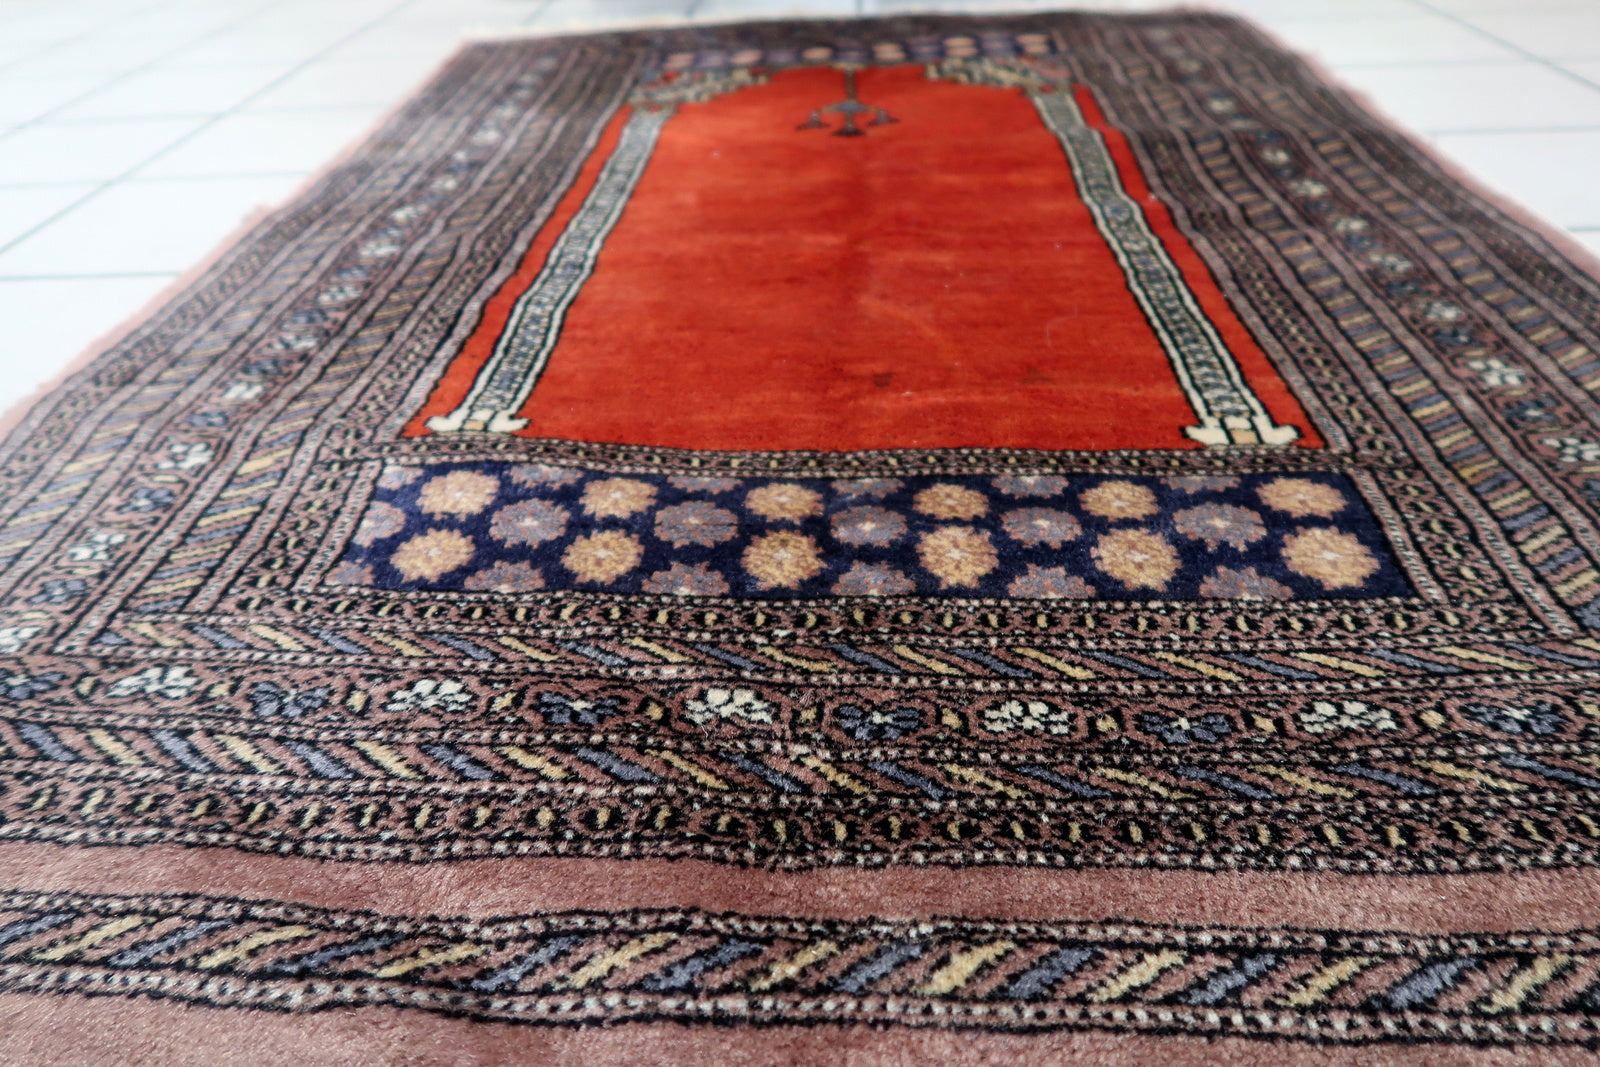 Artistic display of the rug as a decorative accent, adding cultural heritage to any space